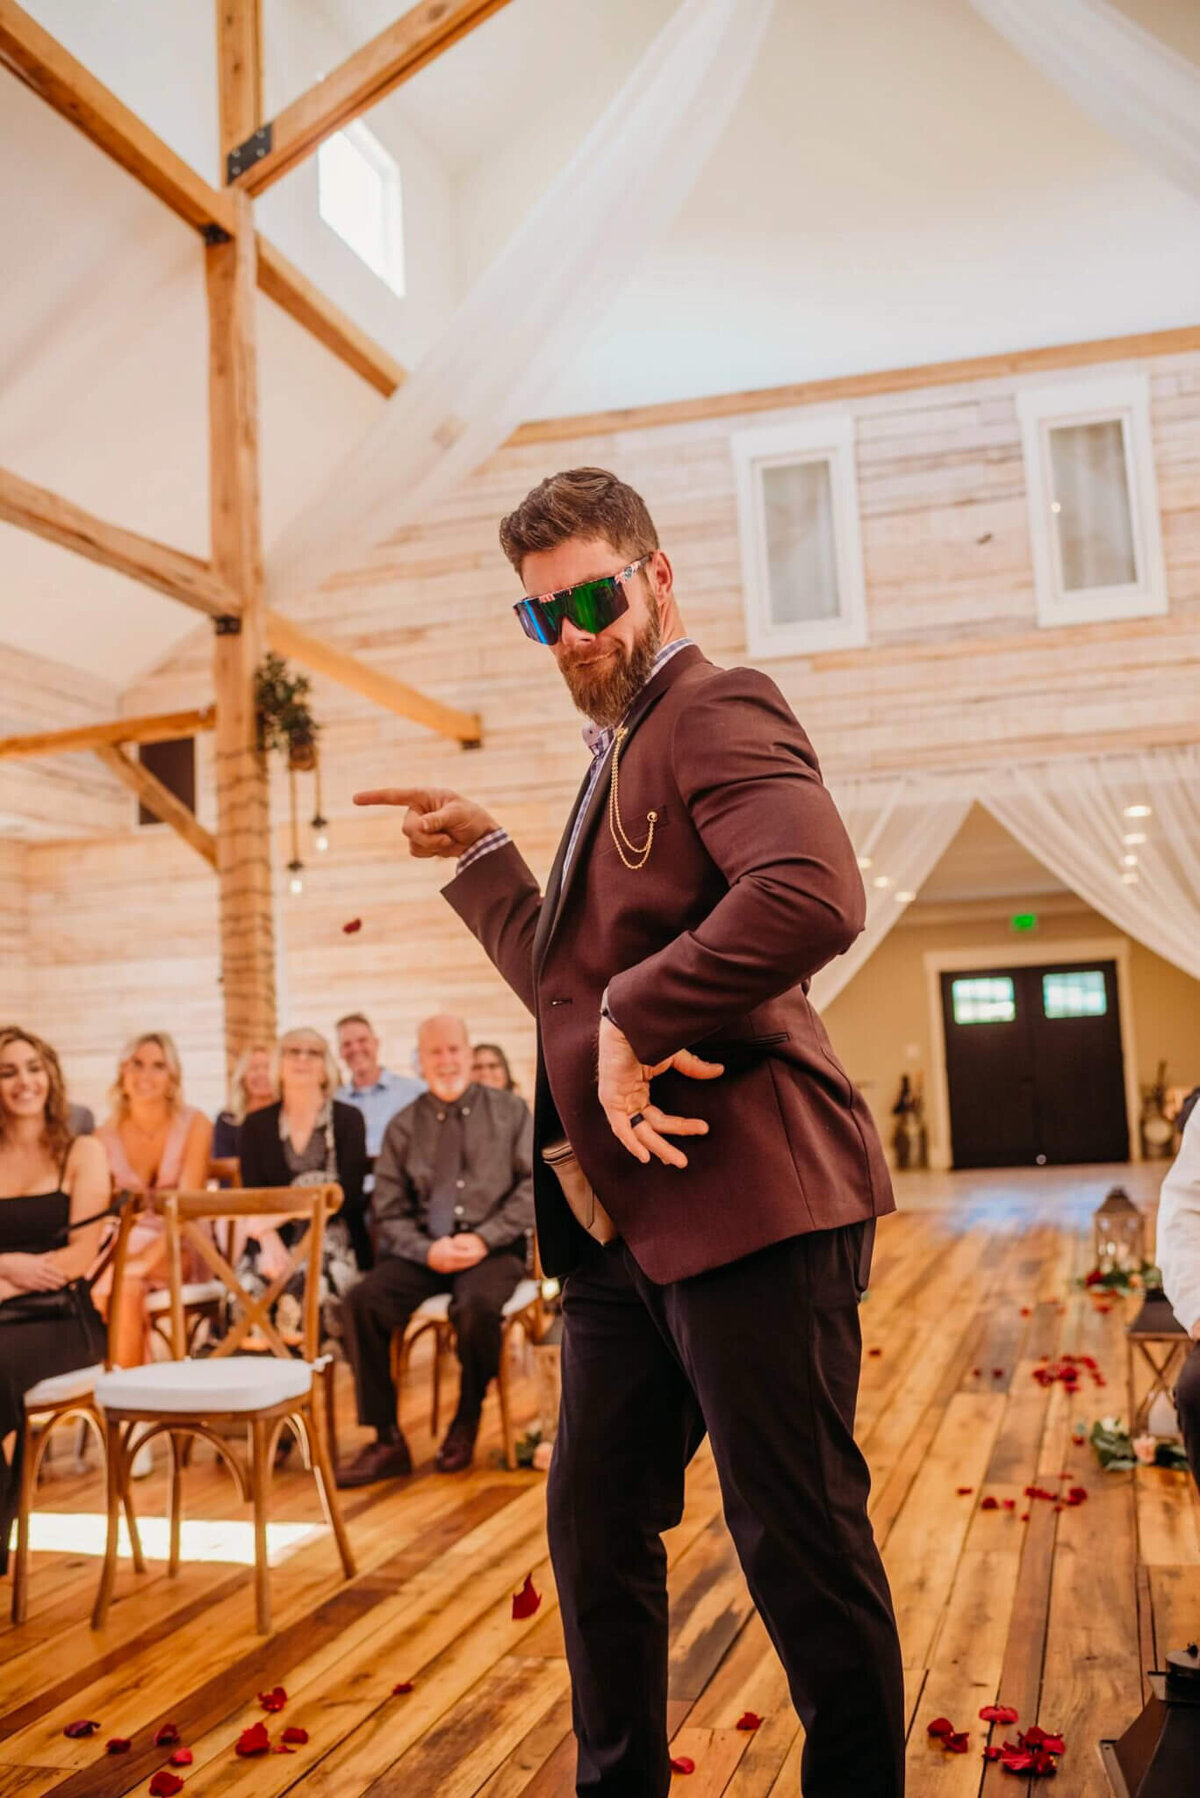 photo of a man wearing sunglasses and walking down a wedding aisle while dancing